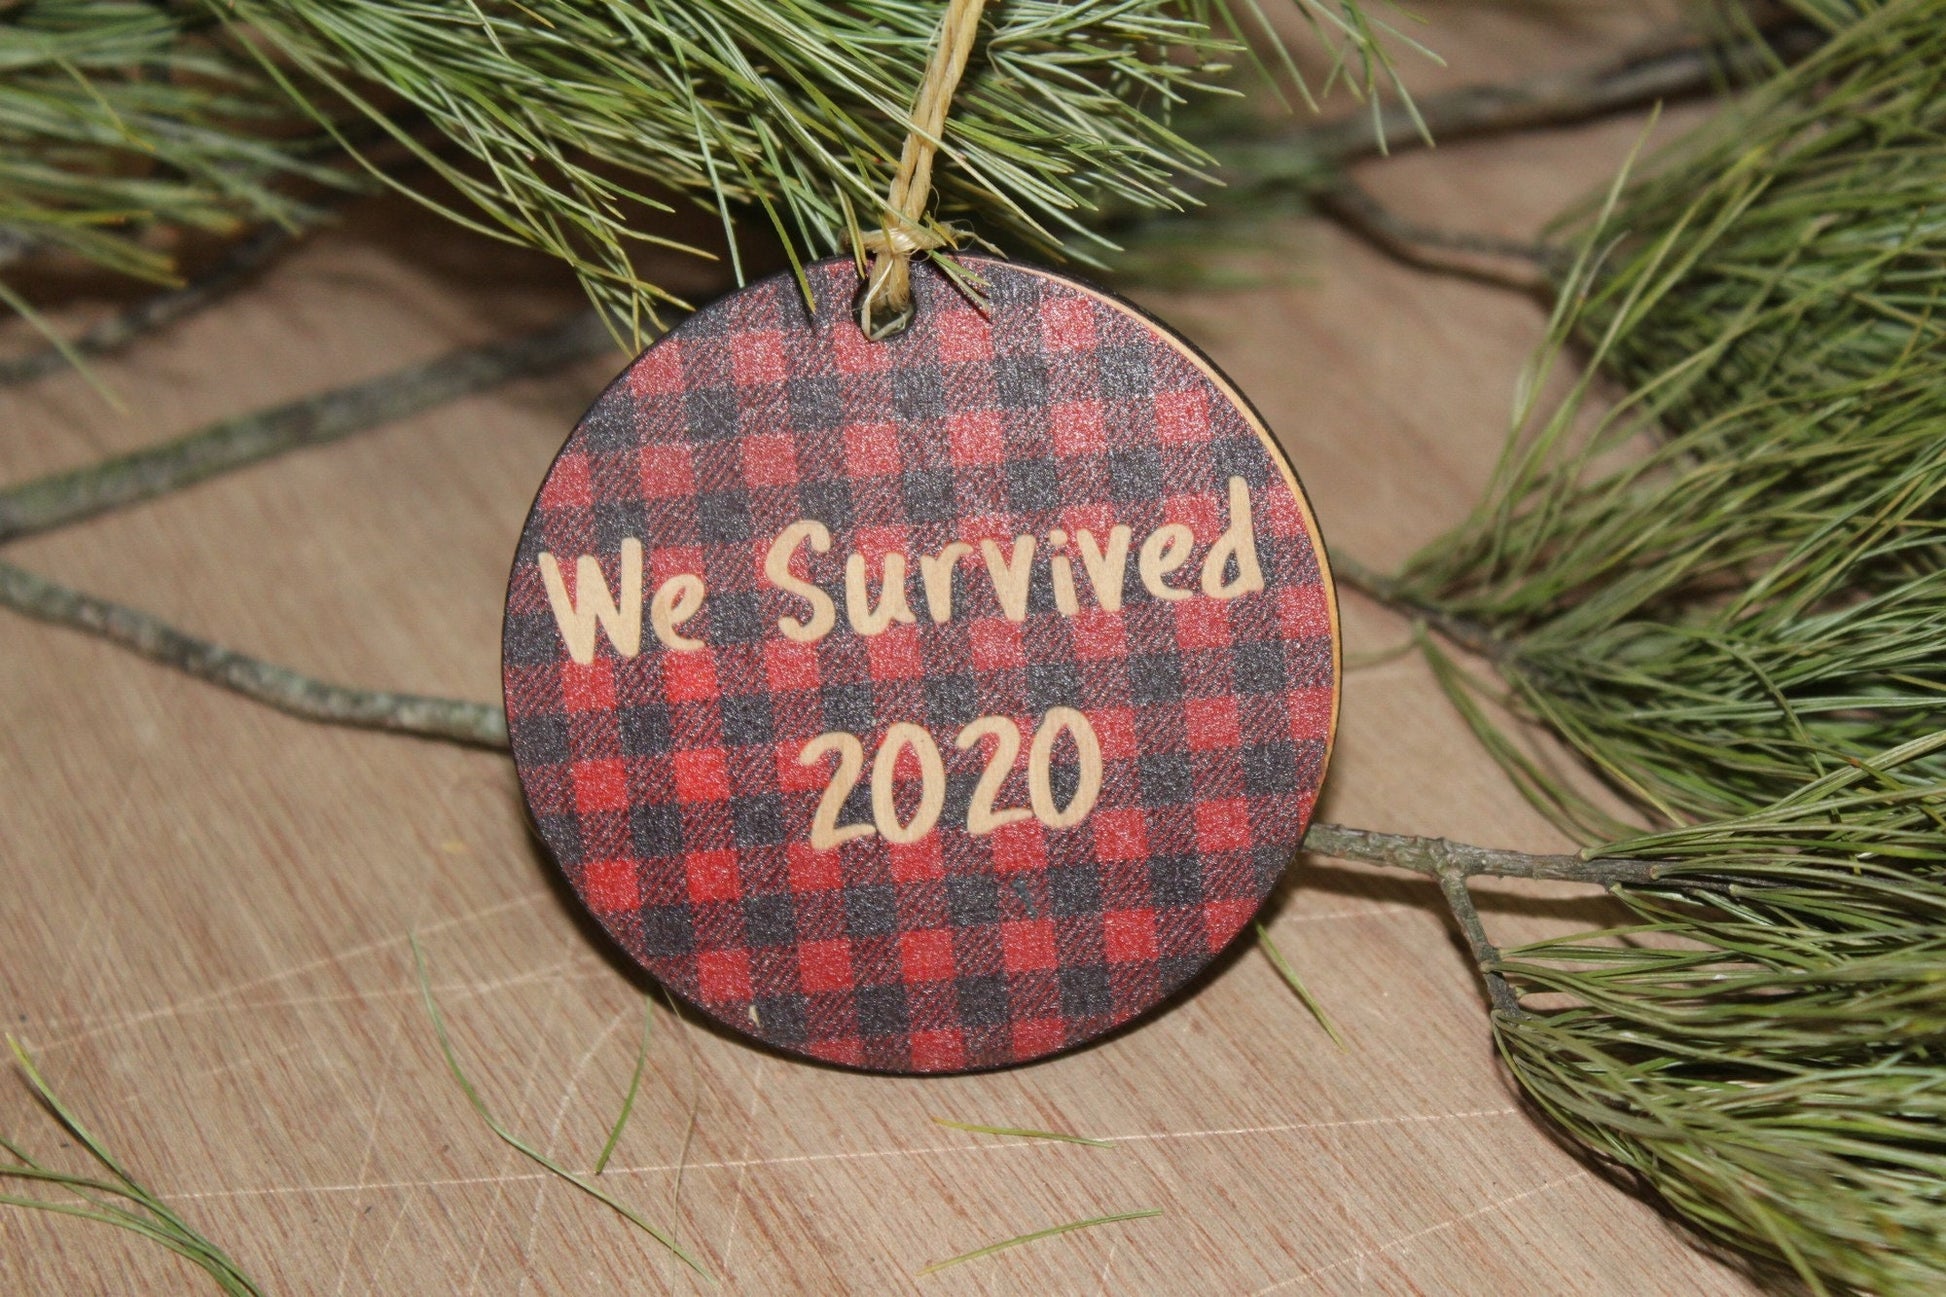 We Survived Giftable Ornament Wood Slice Red Buffalo Plaid Christmas Tree Primitive Rustic Tree Printed Funny Covid Pandemic Farmhouse